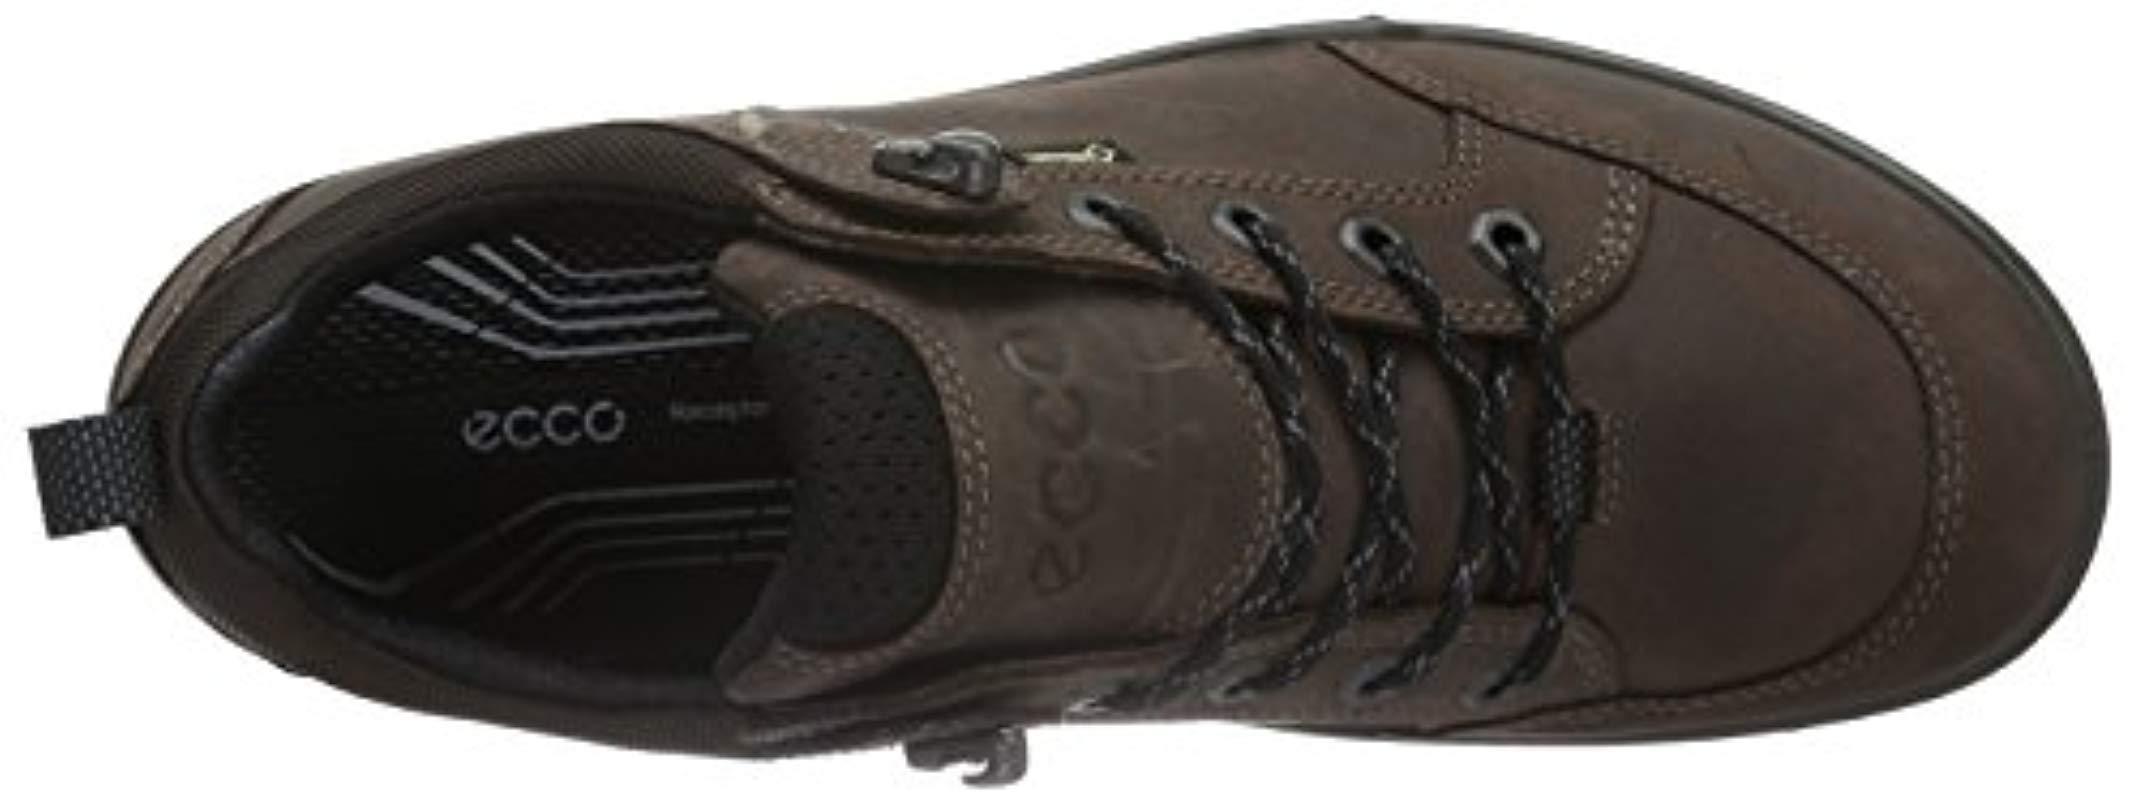 Ecco Leather Xpedition Iii Low Rise Hiking Shoes in Brown for Men - Lyst